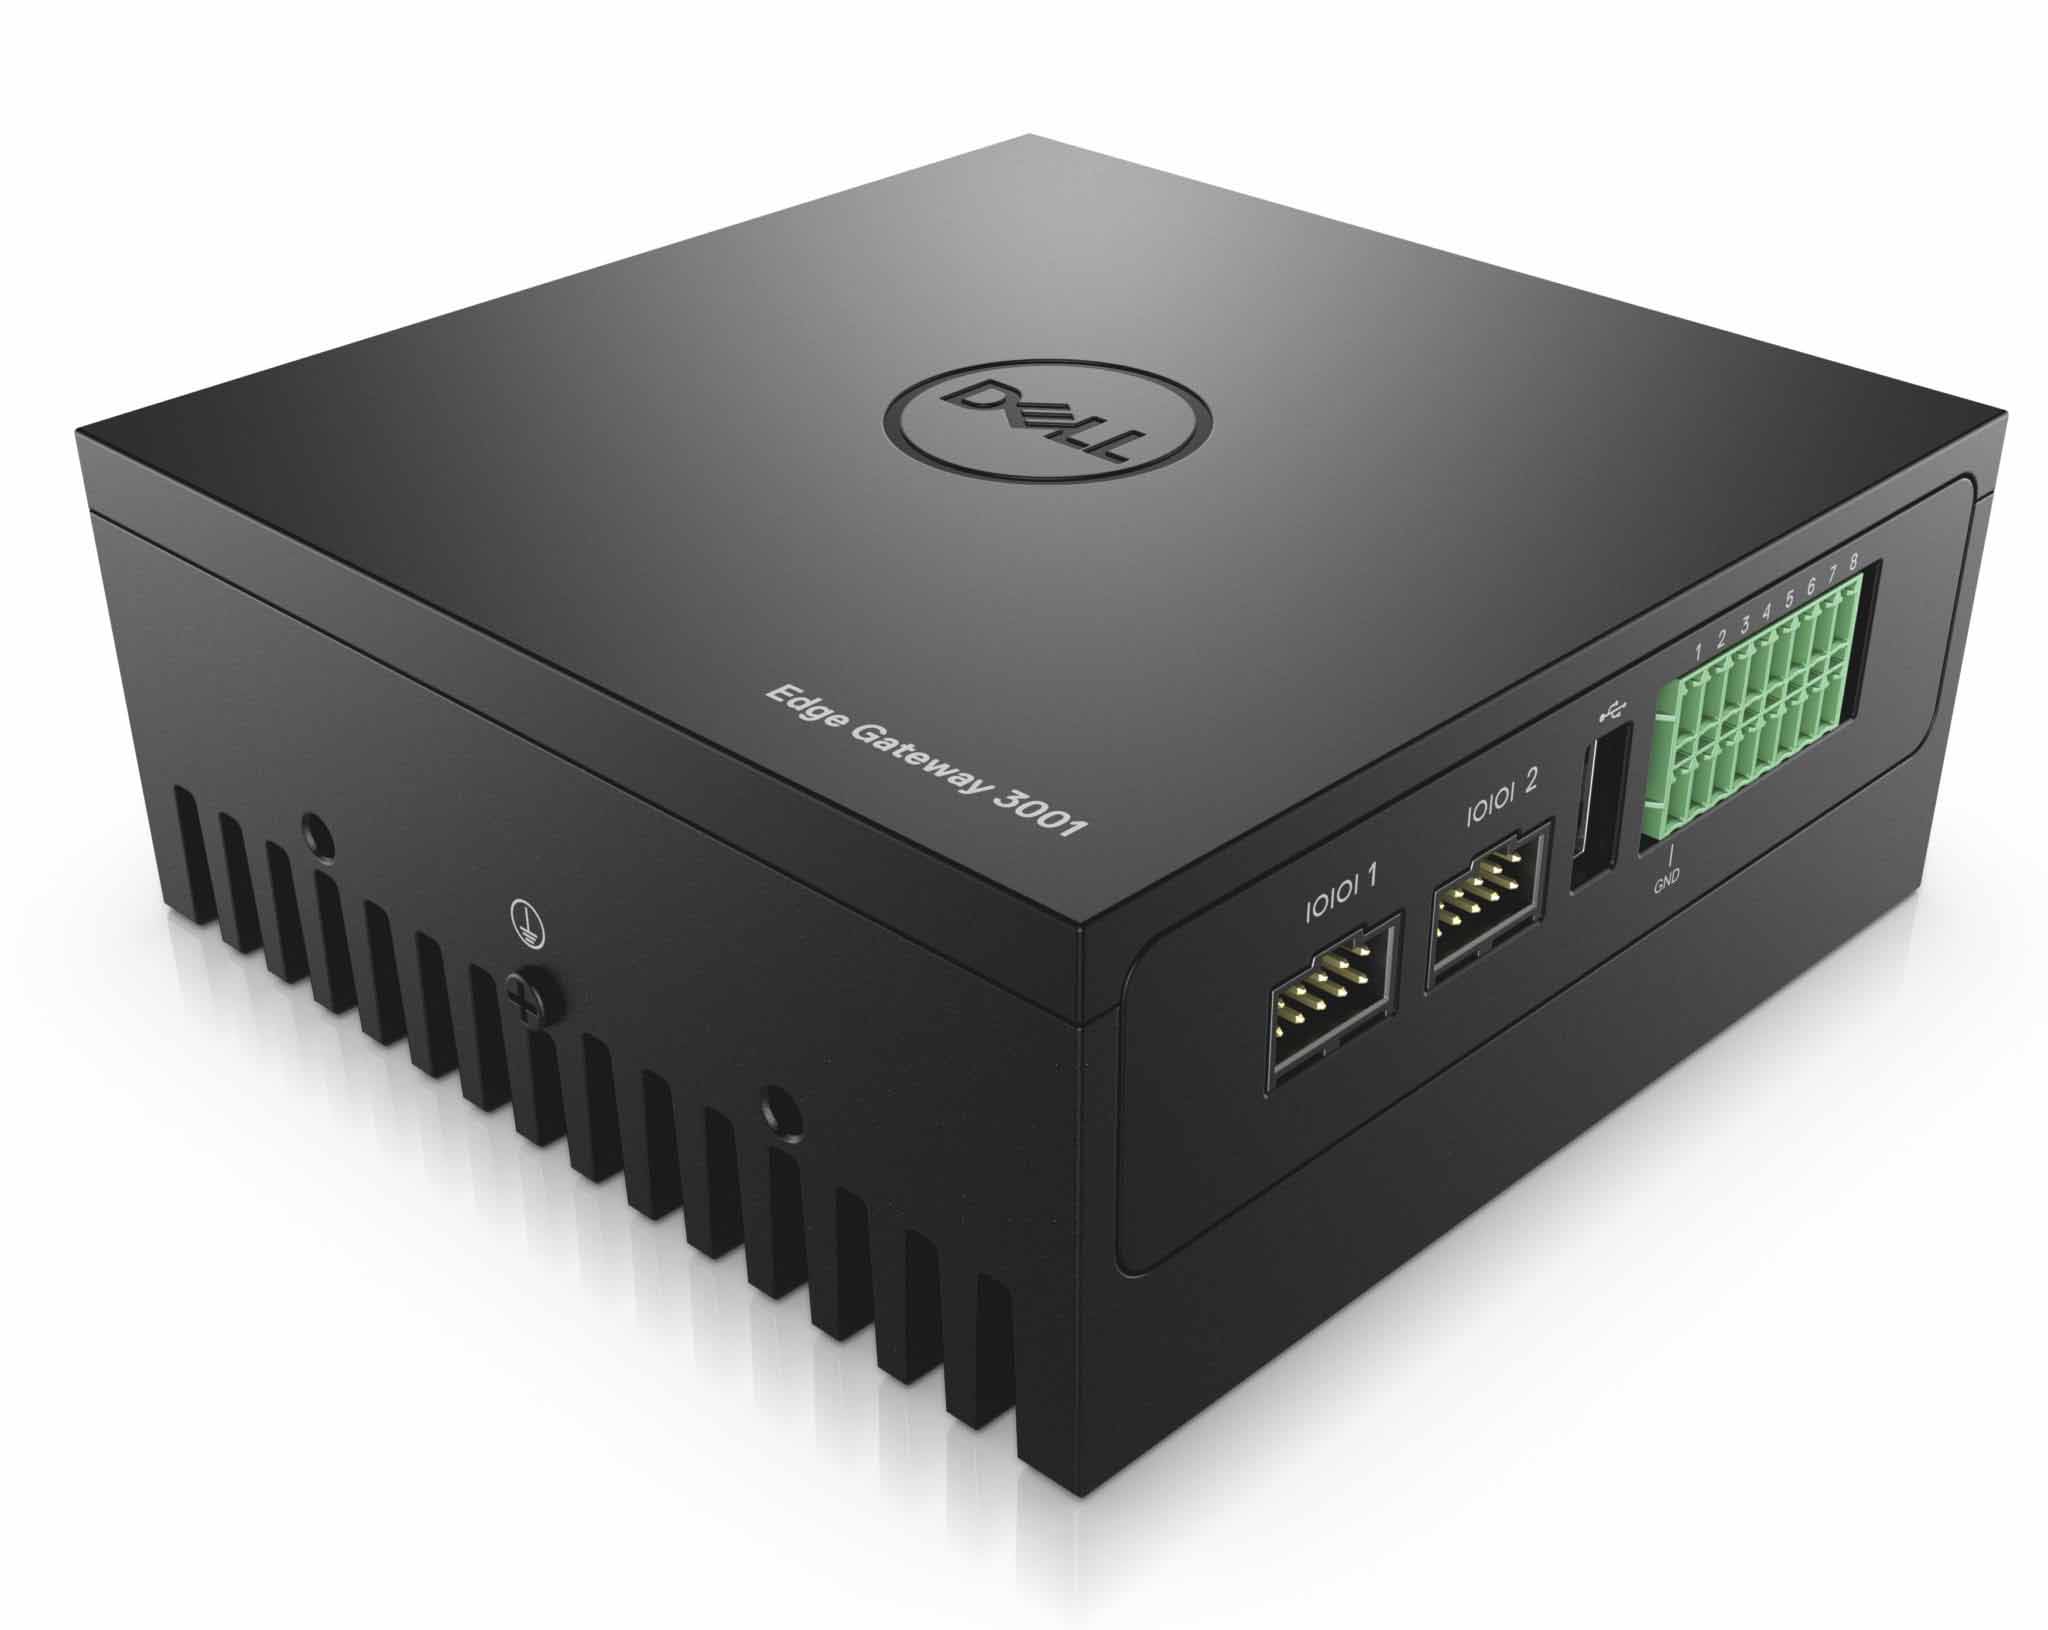 EdgeX-enabled Dell gateway utilized in the Technotects PoC